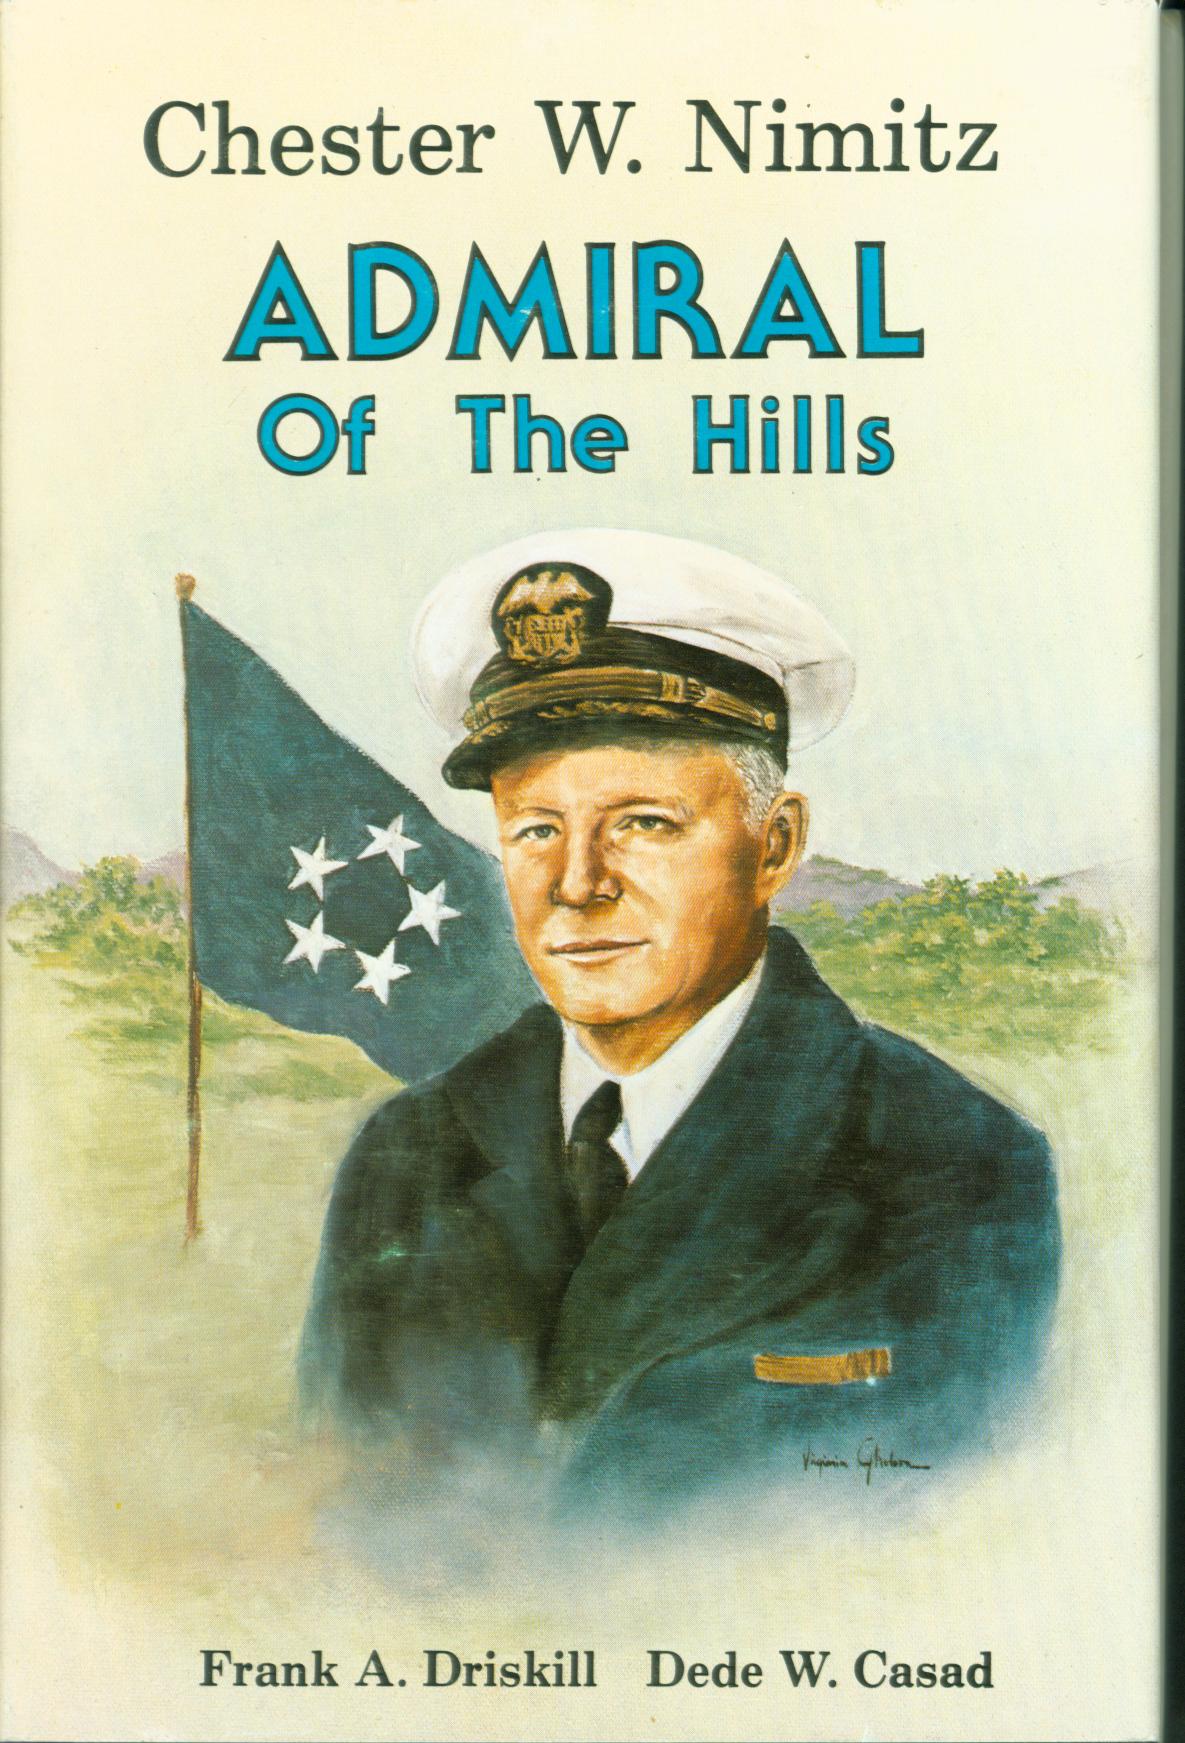 ADMIRAL OF THE HILLS: Chester W. Nimitz. 